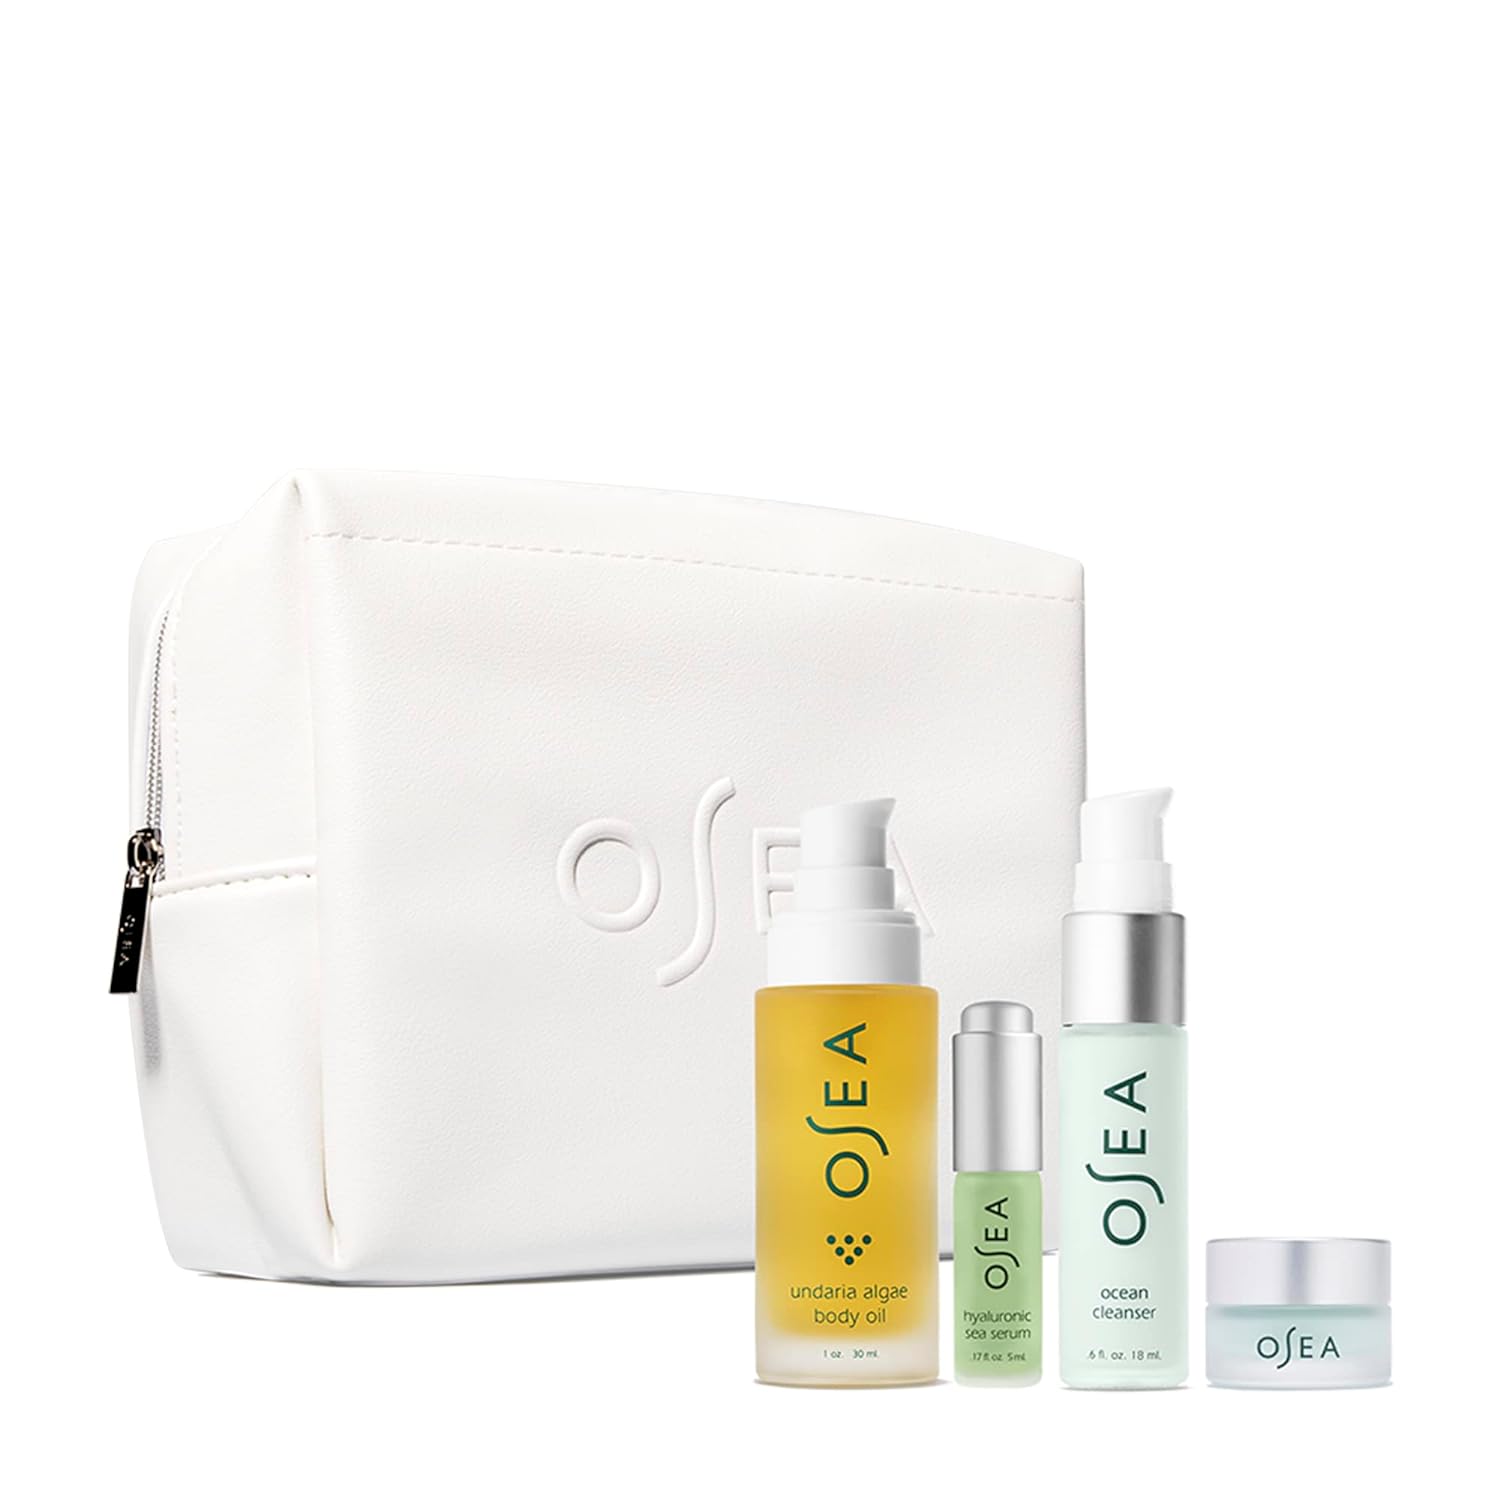 OSEA Bestsellers Discovery Skincare Set - 4-piece Skincare Set - Body Oil, Cleanser, Water Cream, and Serum - Vegan  Cruelty-Free Clean Beauty - Ideal for Beauty Gifts